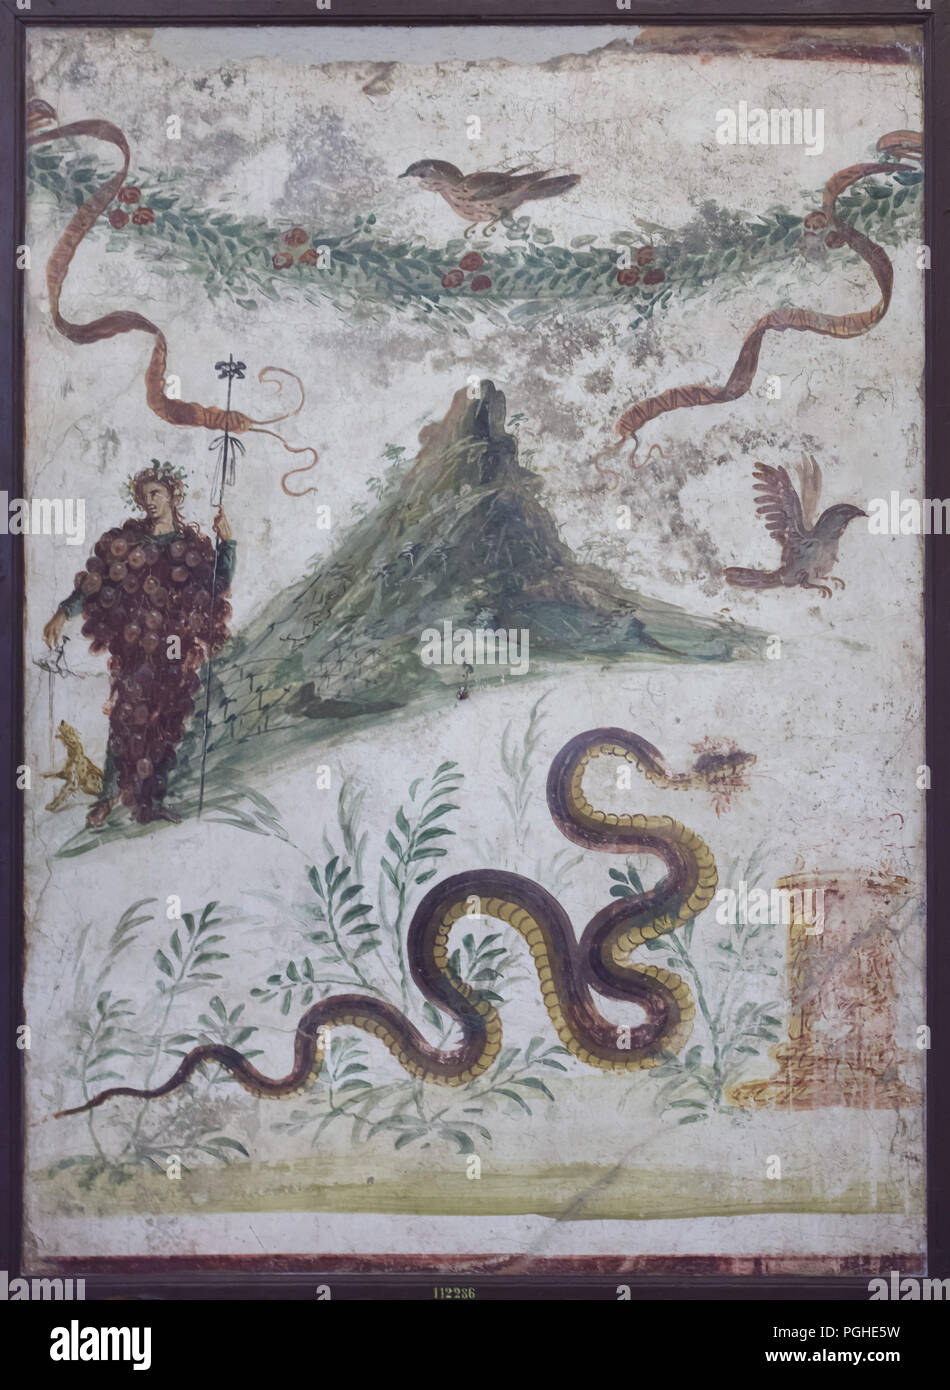 Bacchus and Mount Vesuvius depicted in the Roman fresco from the House of the Centenary (Casa del Centenario) in Pompeii, now on display in the National Archaeological Museum (Museo Archeologico Nazionale di Napoli) in Naples, Campania, Italy. Stock Photo